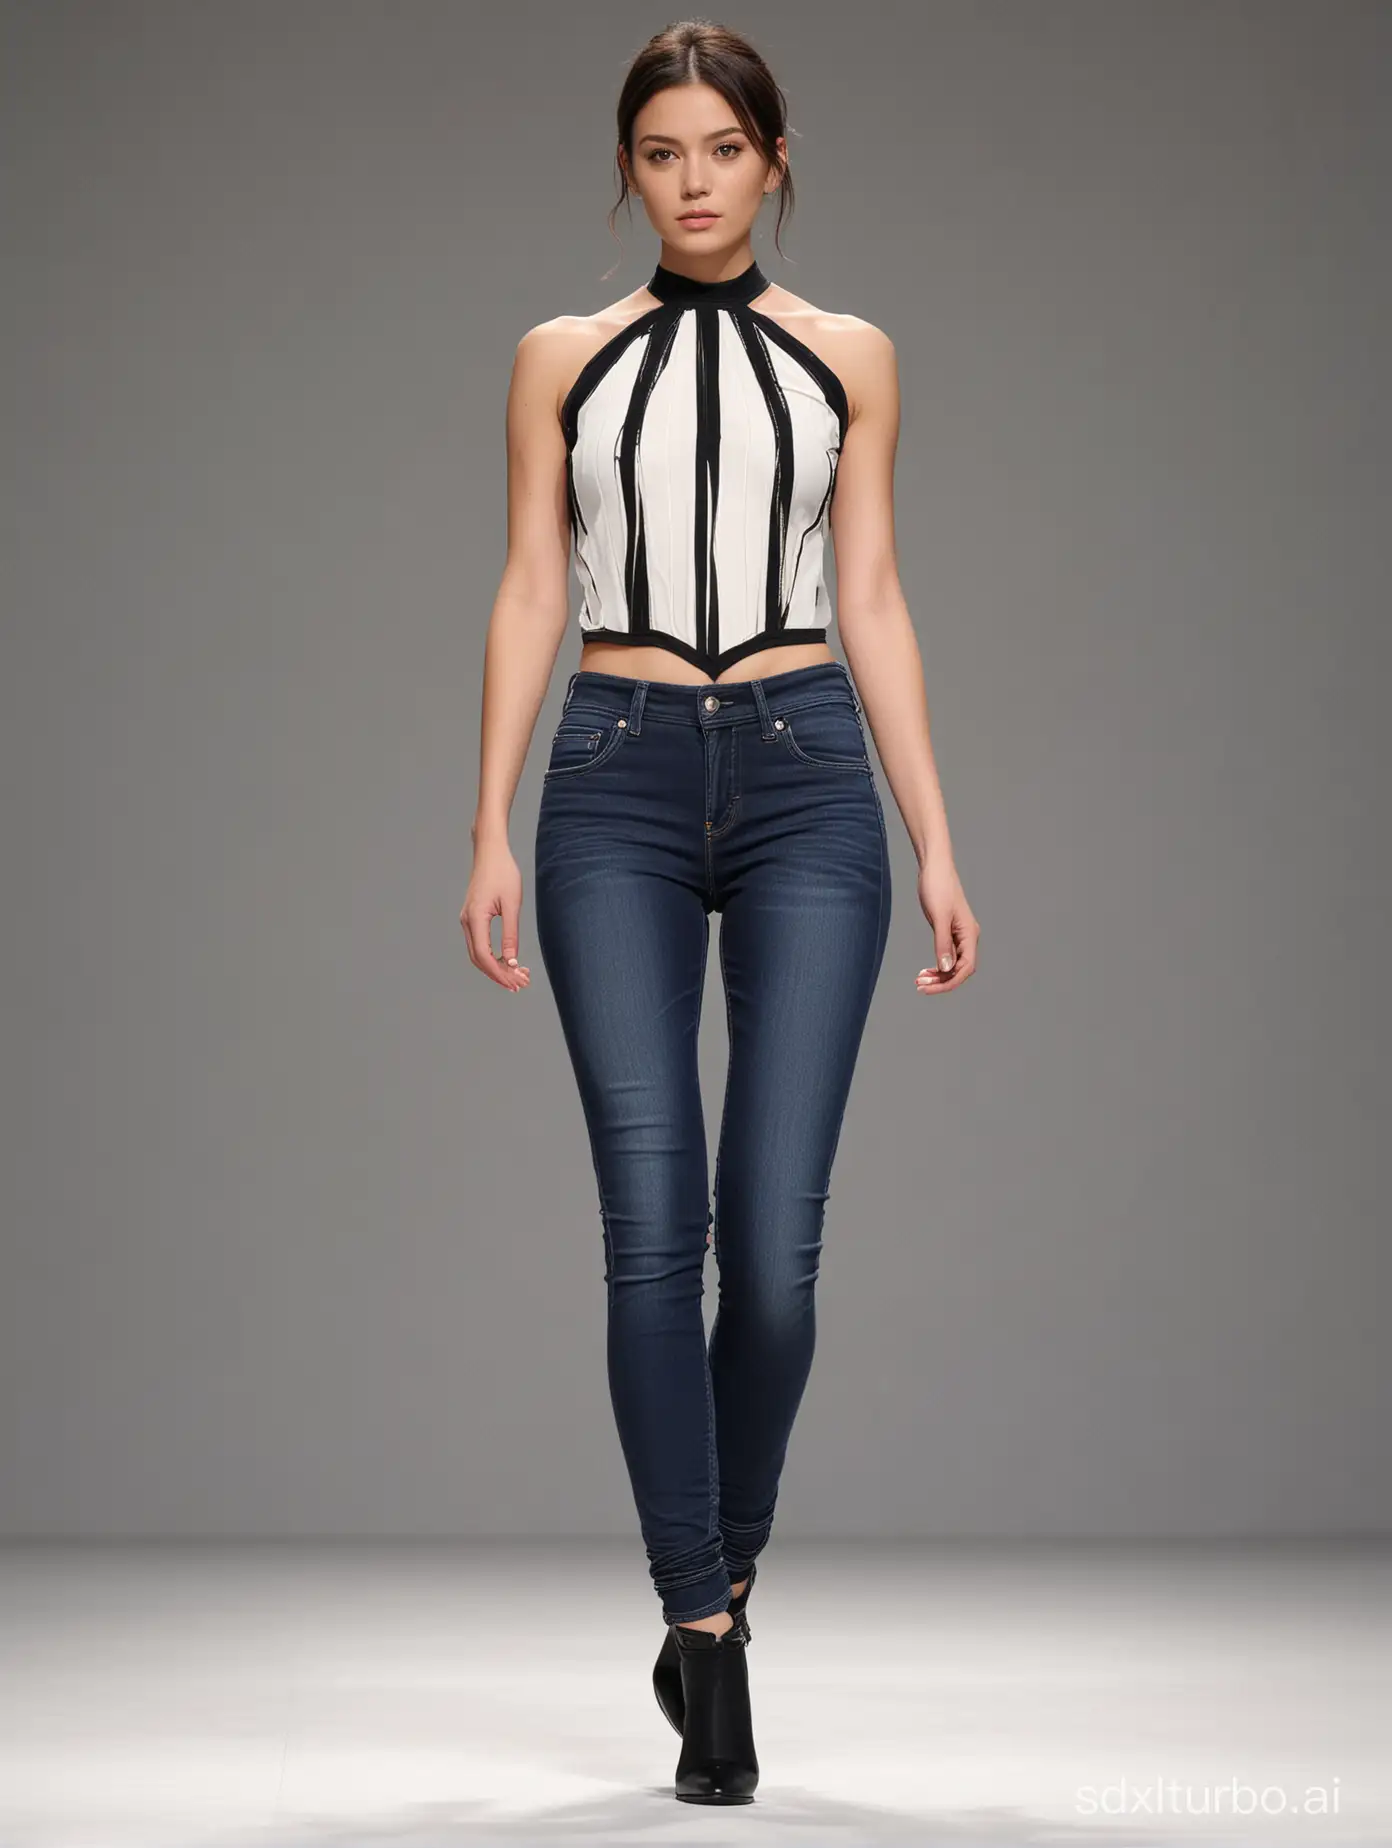 Liza gonzales in skinny jeans， walks along the runway, perky small breast hidden by a laced top，her silhouette outlined with bold lines against a clean background. The minimalist style captures every detail of her figure with simple shapes and clear lines, creating a sense of sophistication that resonates across all art forms. High resolution.